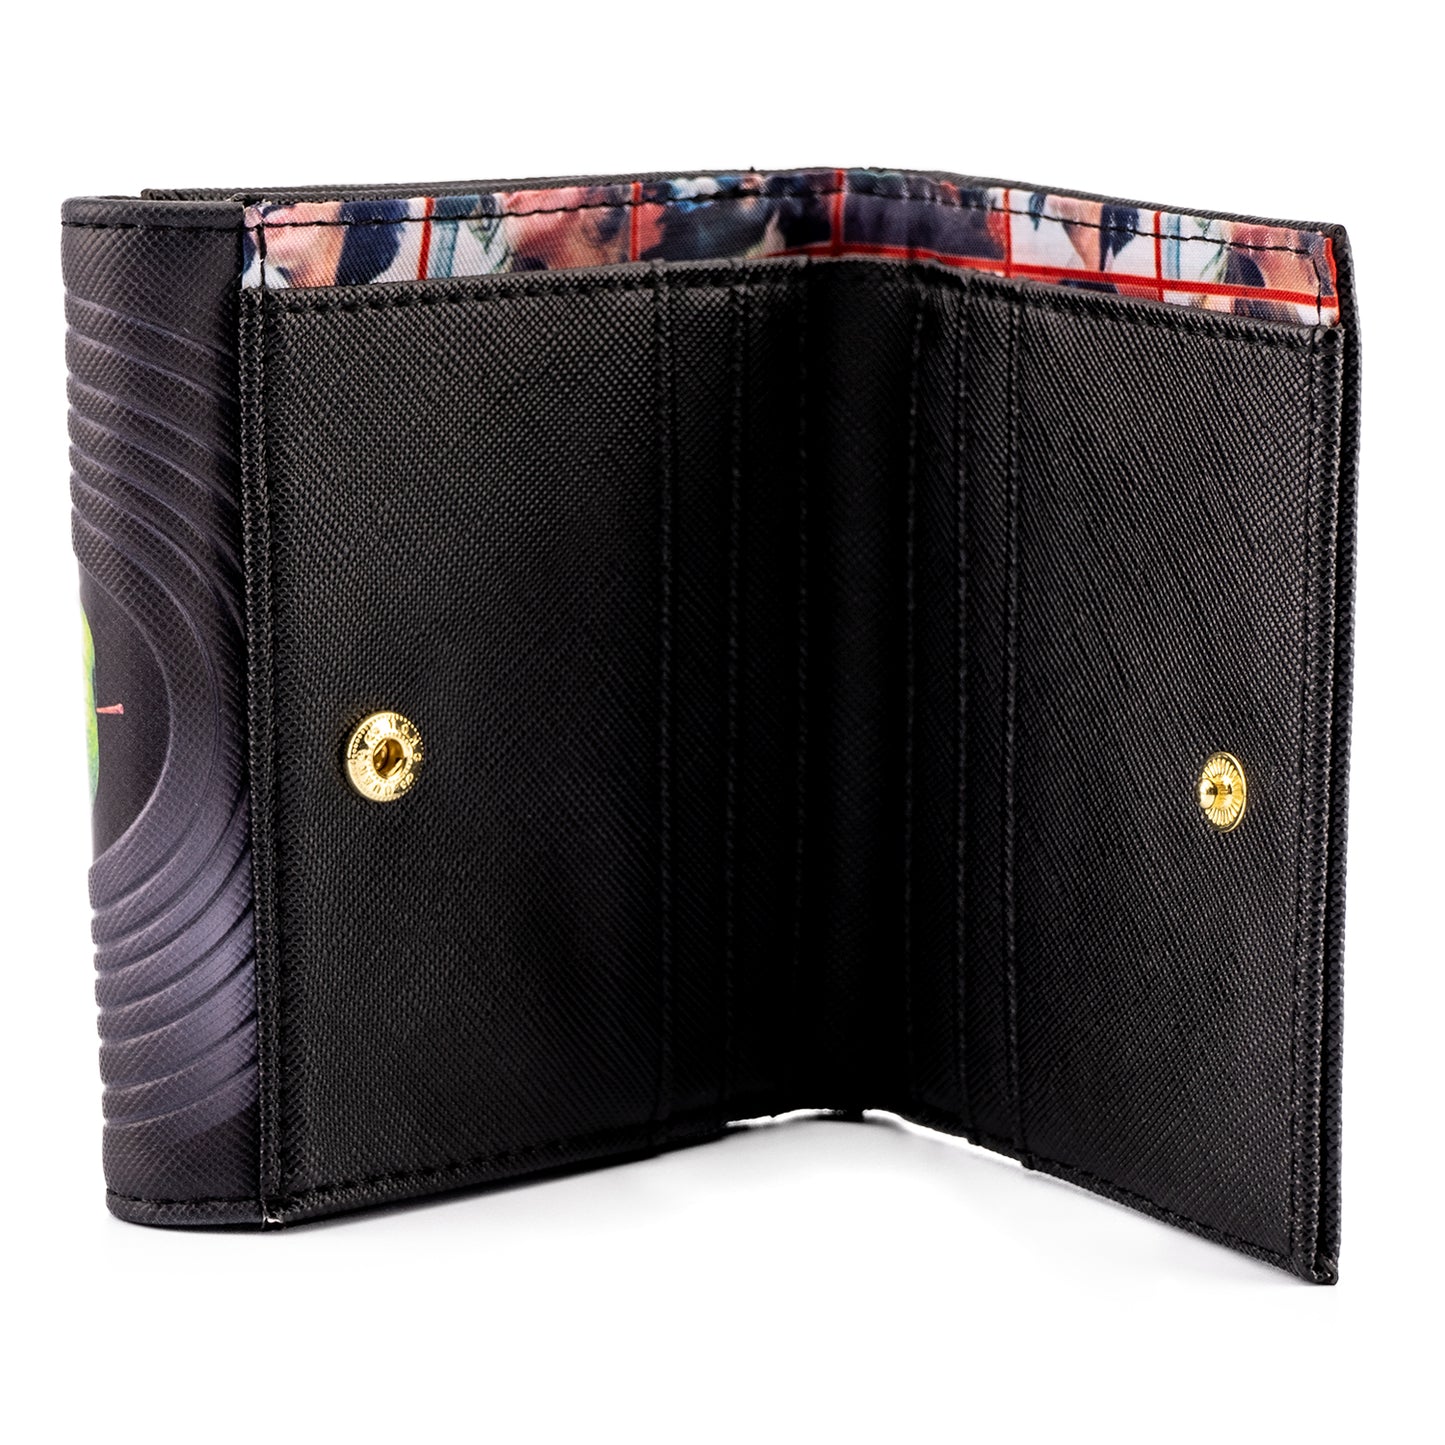 Loungefly The Beatles Let It Be Vinyl Record Zip-Around Wallet